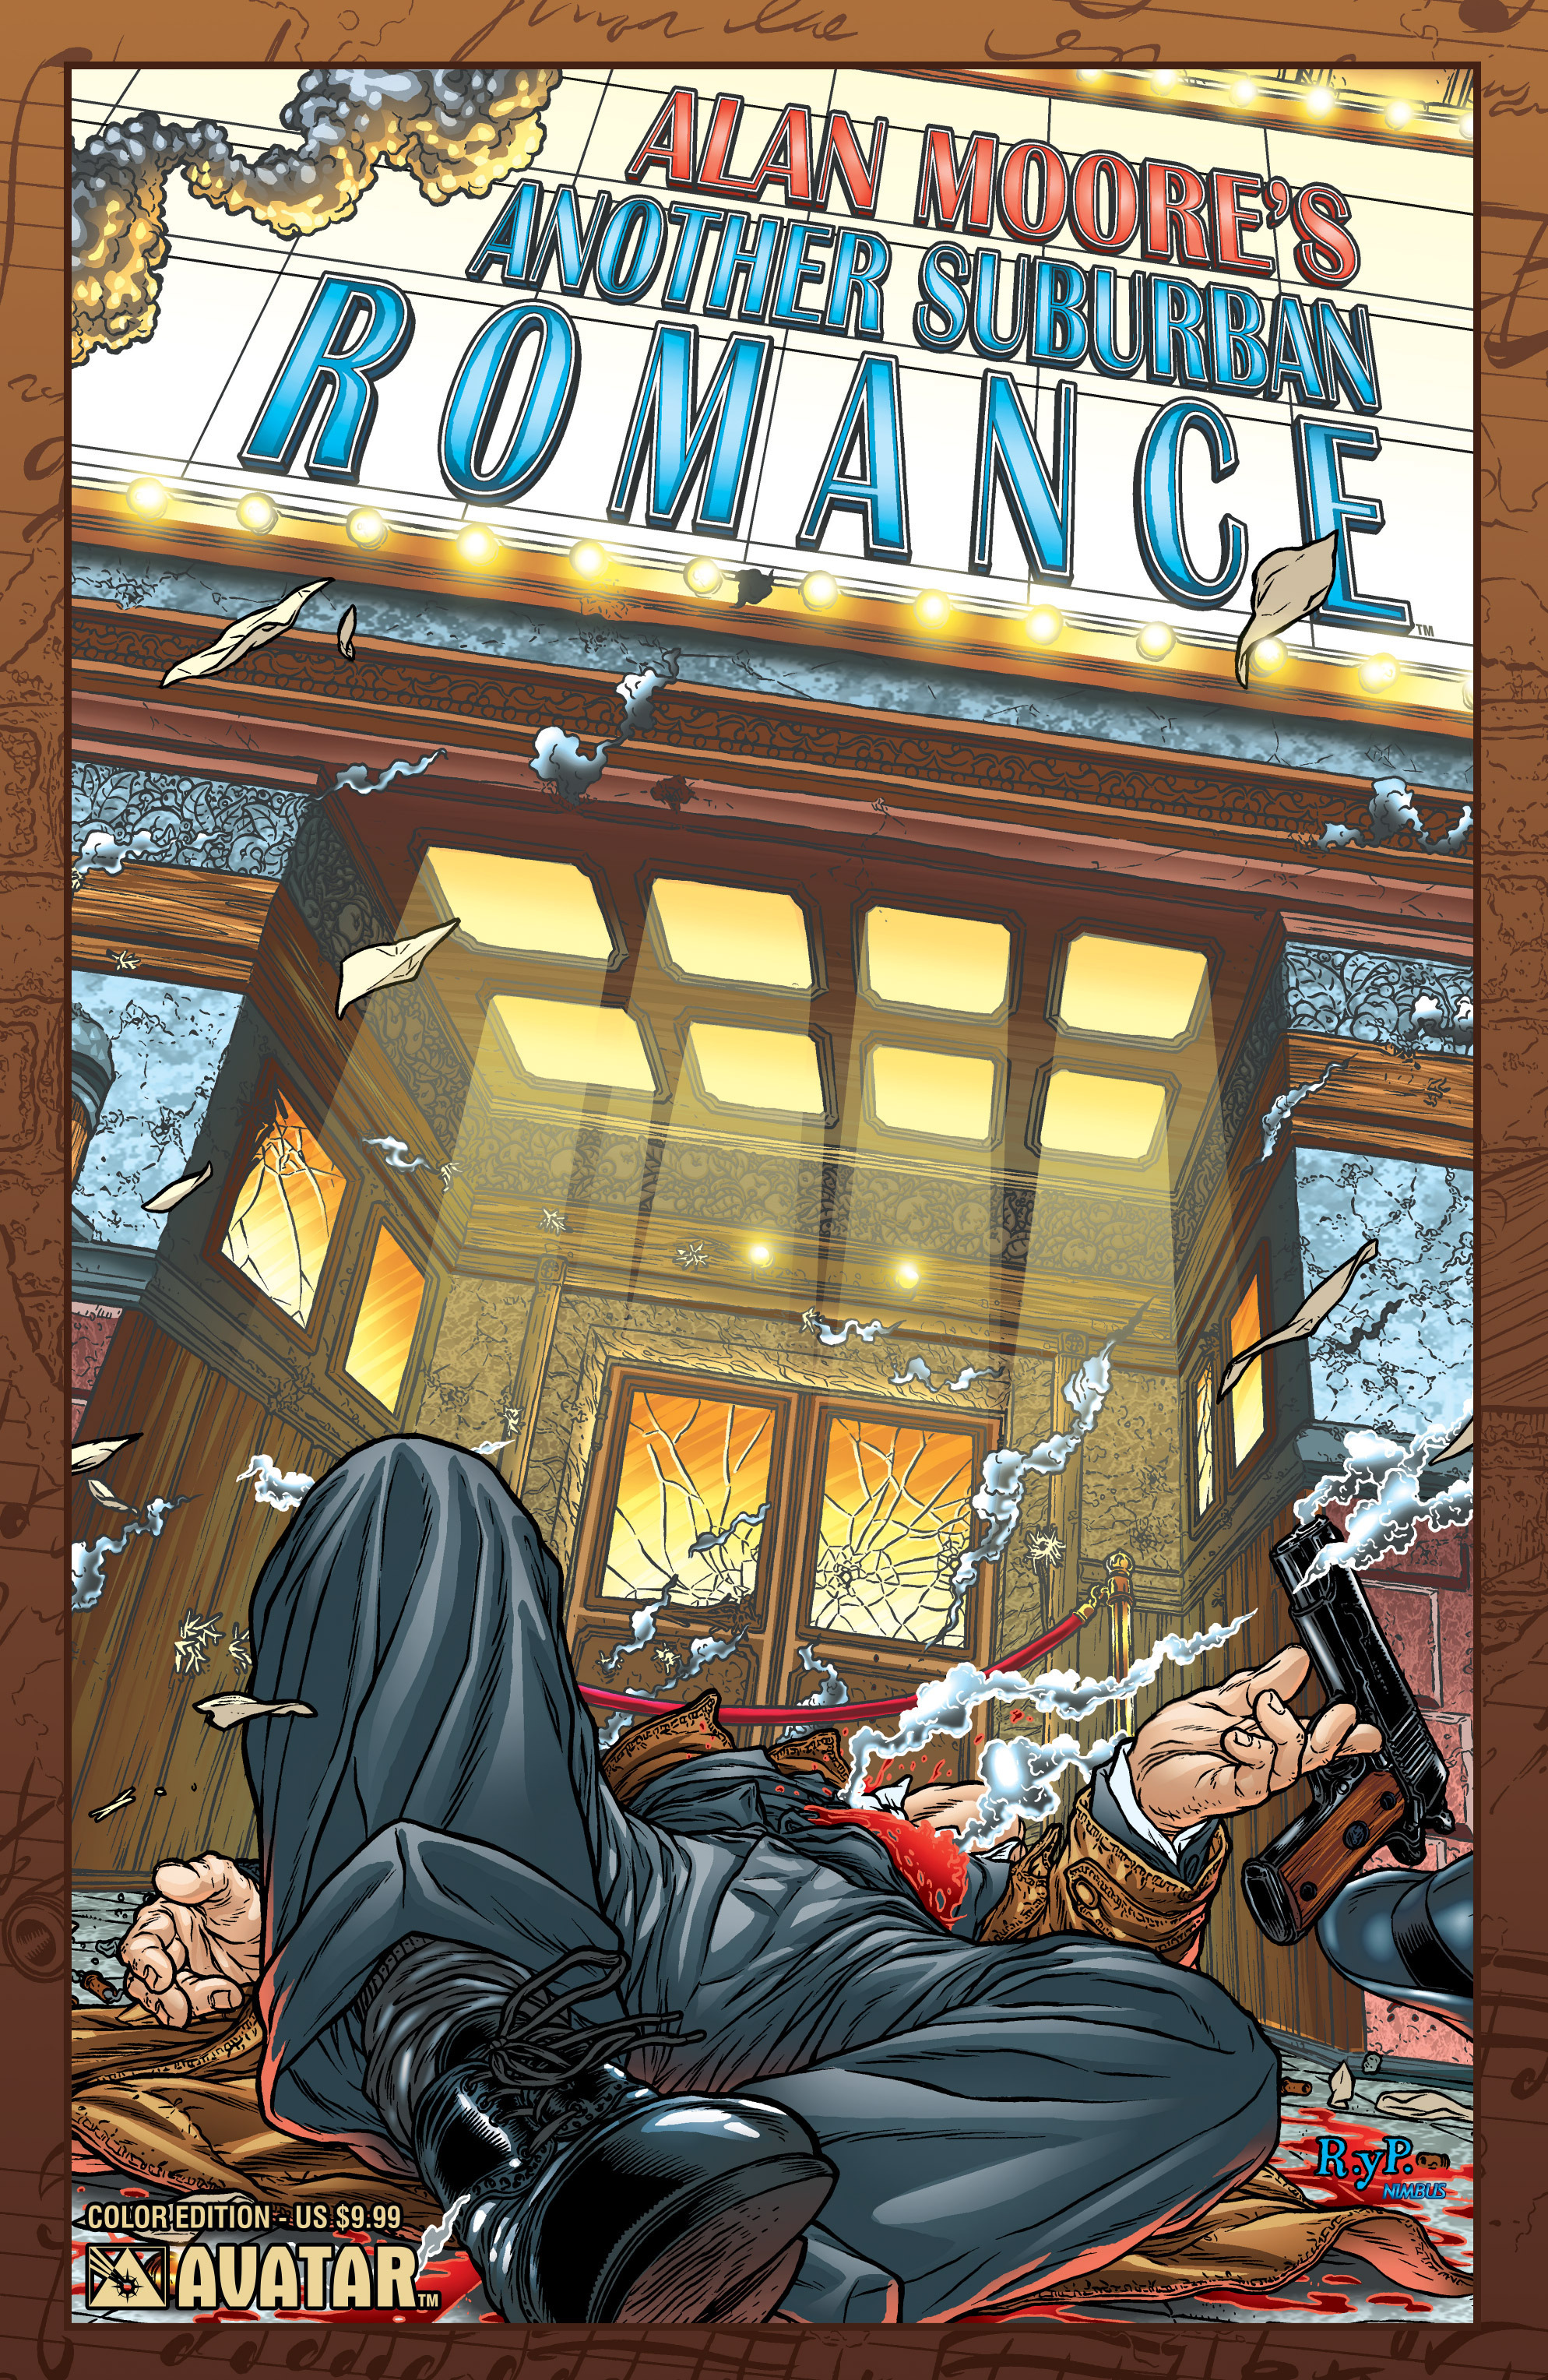 Read online Alan Moore's Another Suburban Romance comic -  Issue #Alan Moore's Another Suburban Romance Full - 1